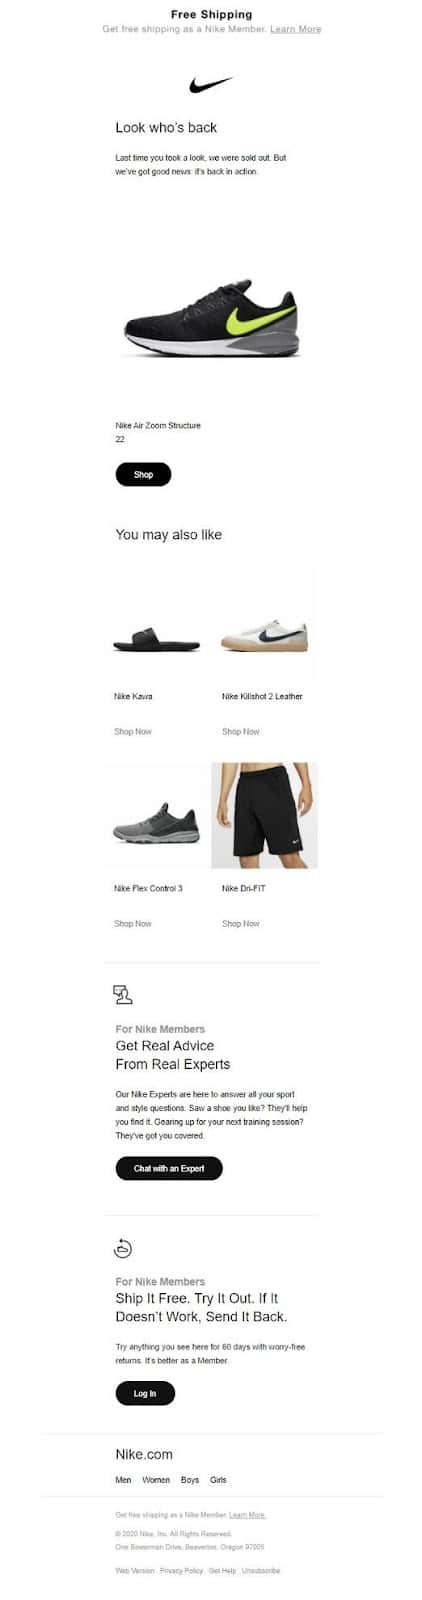 nike-product-recommendations-email-example